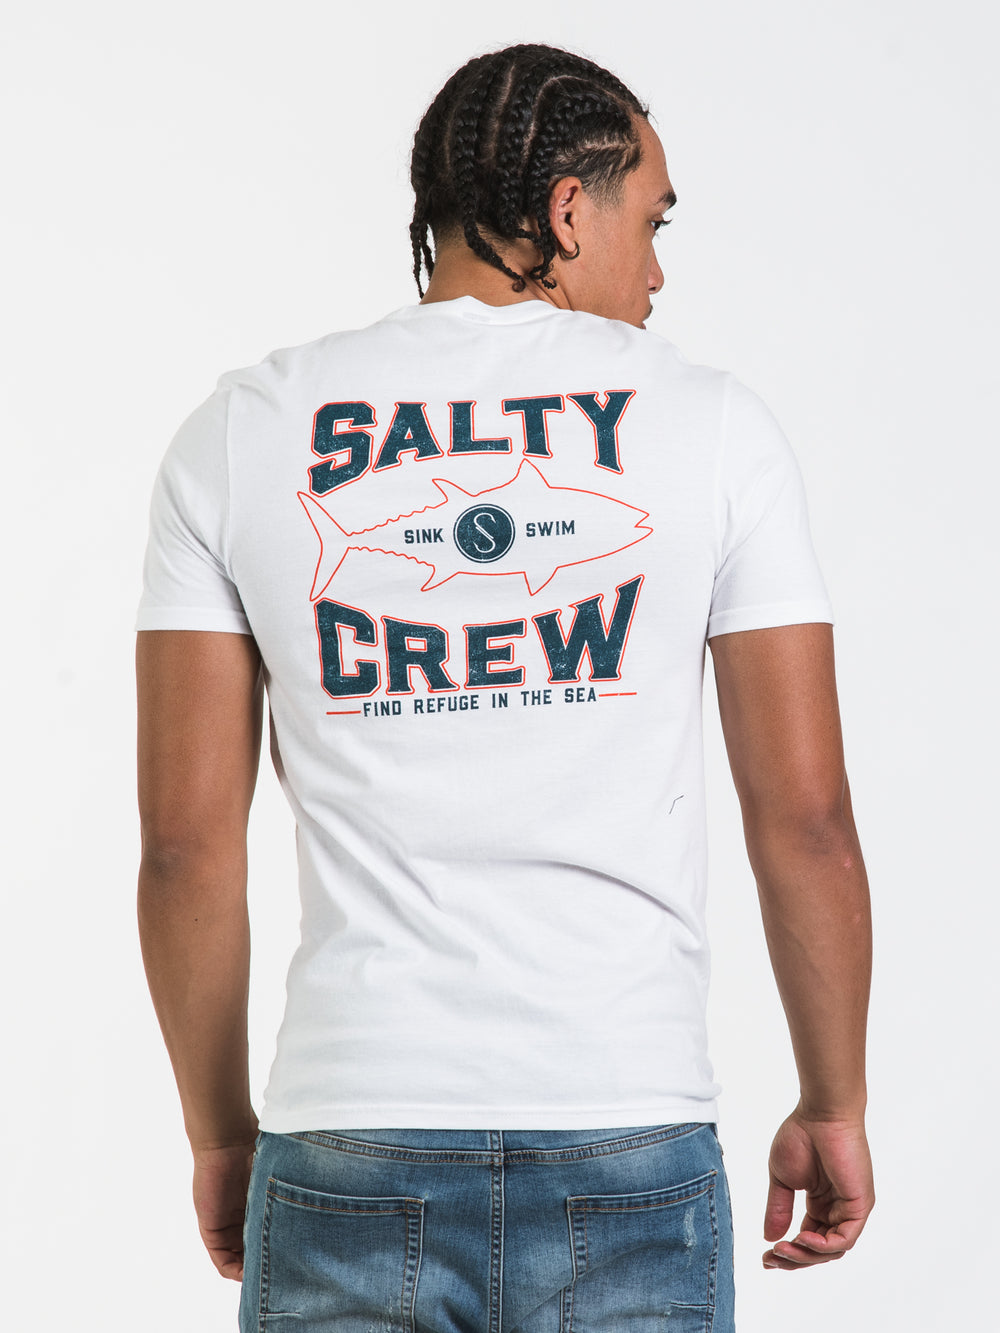 SALTY CREW TIGHT LINES PREMIUM POCKET T-SHIRT - CLEARANCE